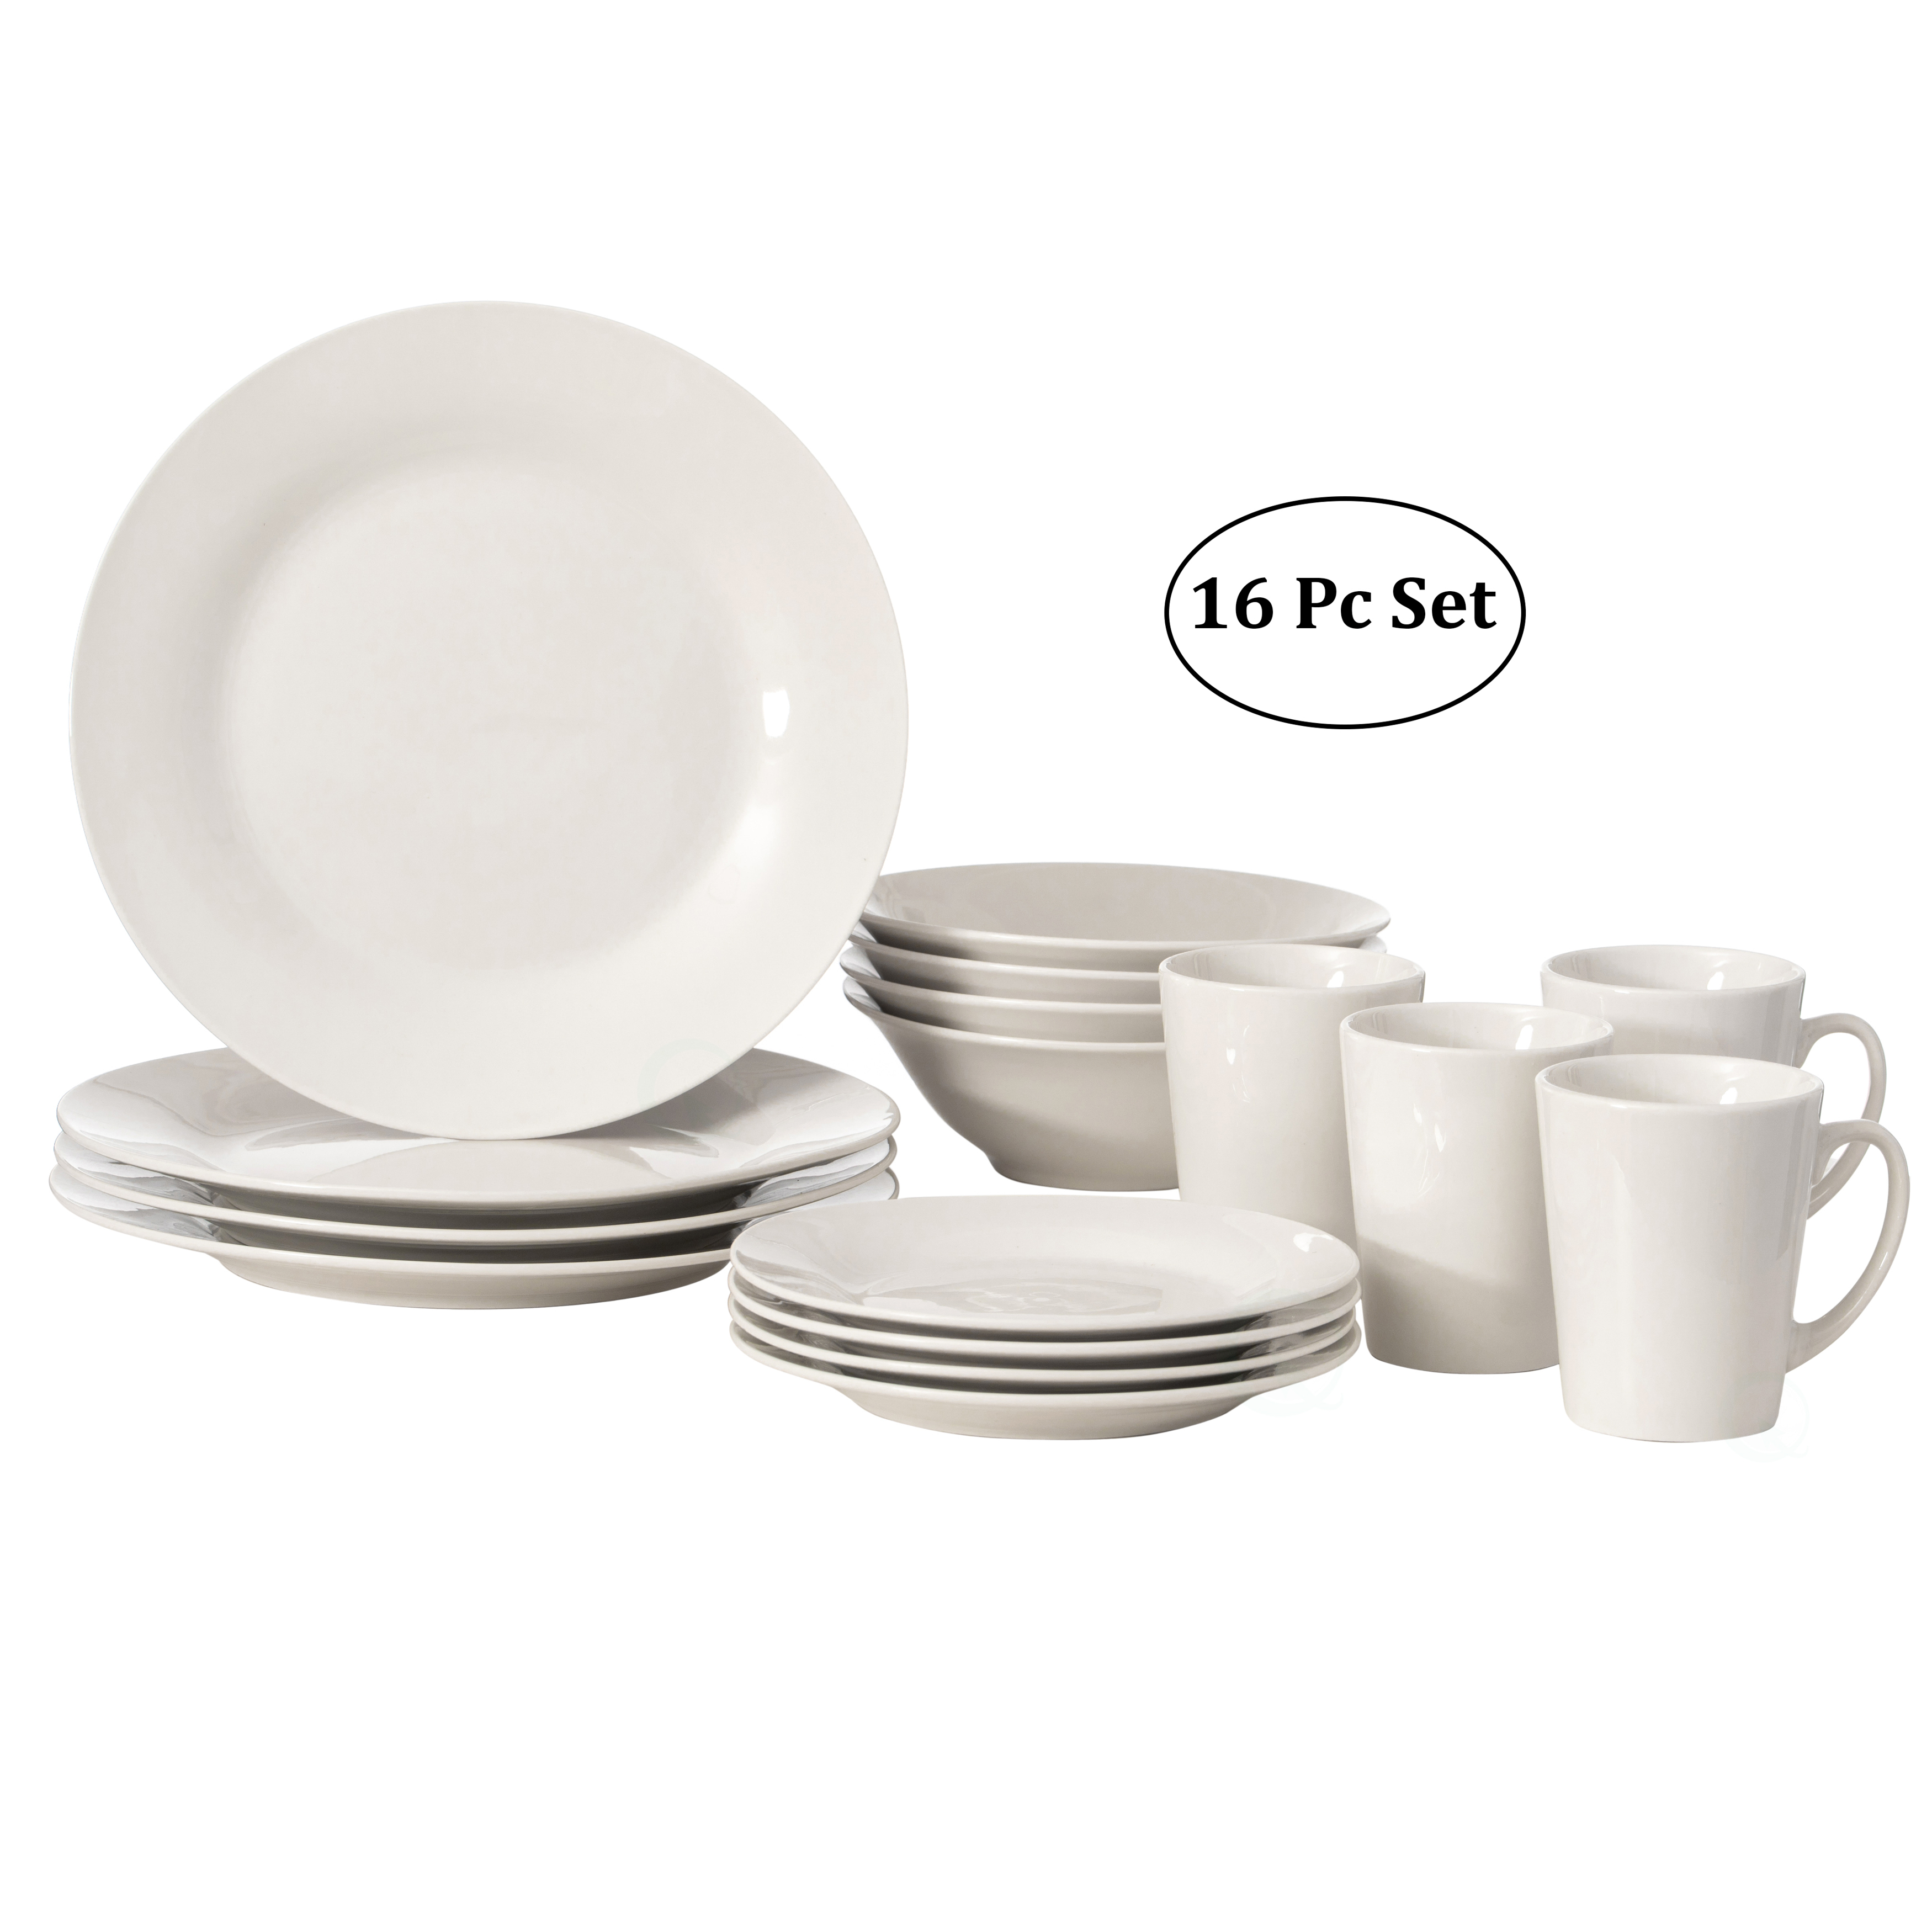 16 PC Rimmed Dinnerware Set for 4 Person Mugs, Salad and Dinner Plates and Bowls Sets, High Quality Dishes, Dishwasher and Microwave Safe